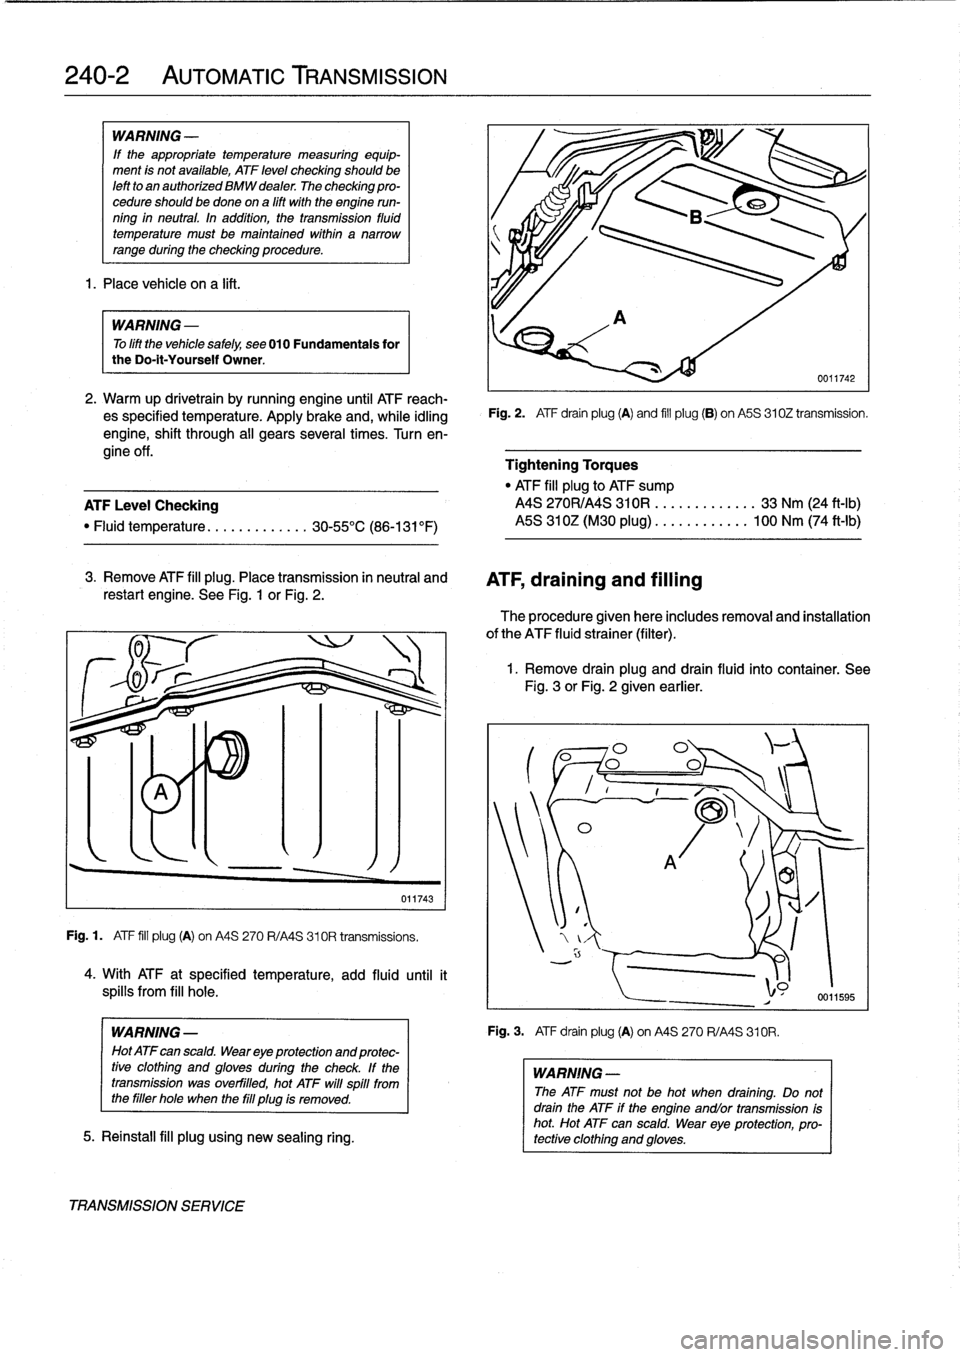 BMW 318i 1997 E36 Manual PDF 
240-2

	

AUTOMATIC
TRANSMISSION

WARNING
-

If
the
appropriate
temperature
measuring
equip-
ment
is
not
available,
ATF
leve¡
checking
shouldbe
left
to
an
authorized
BMW
dealer
The
checking
pro-
ced